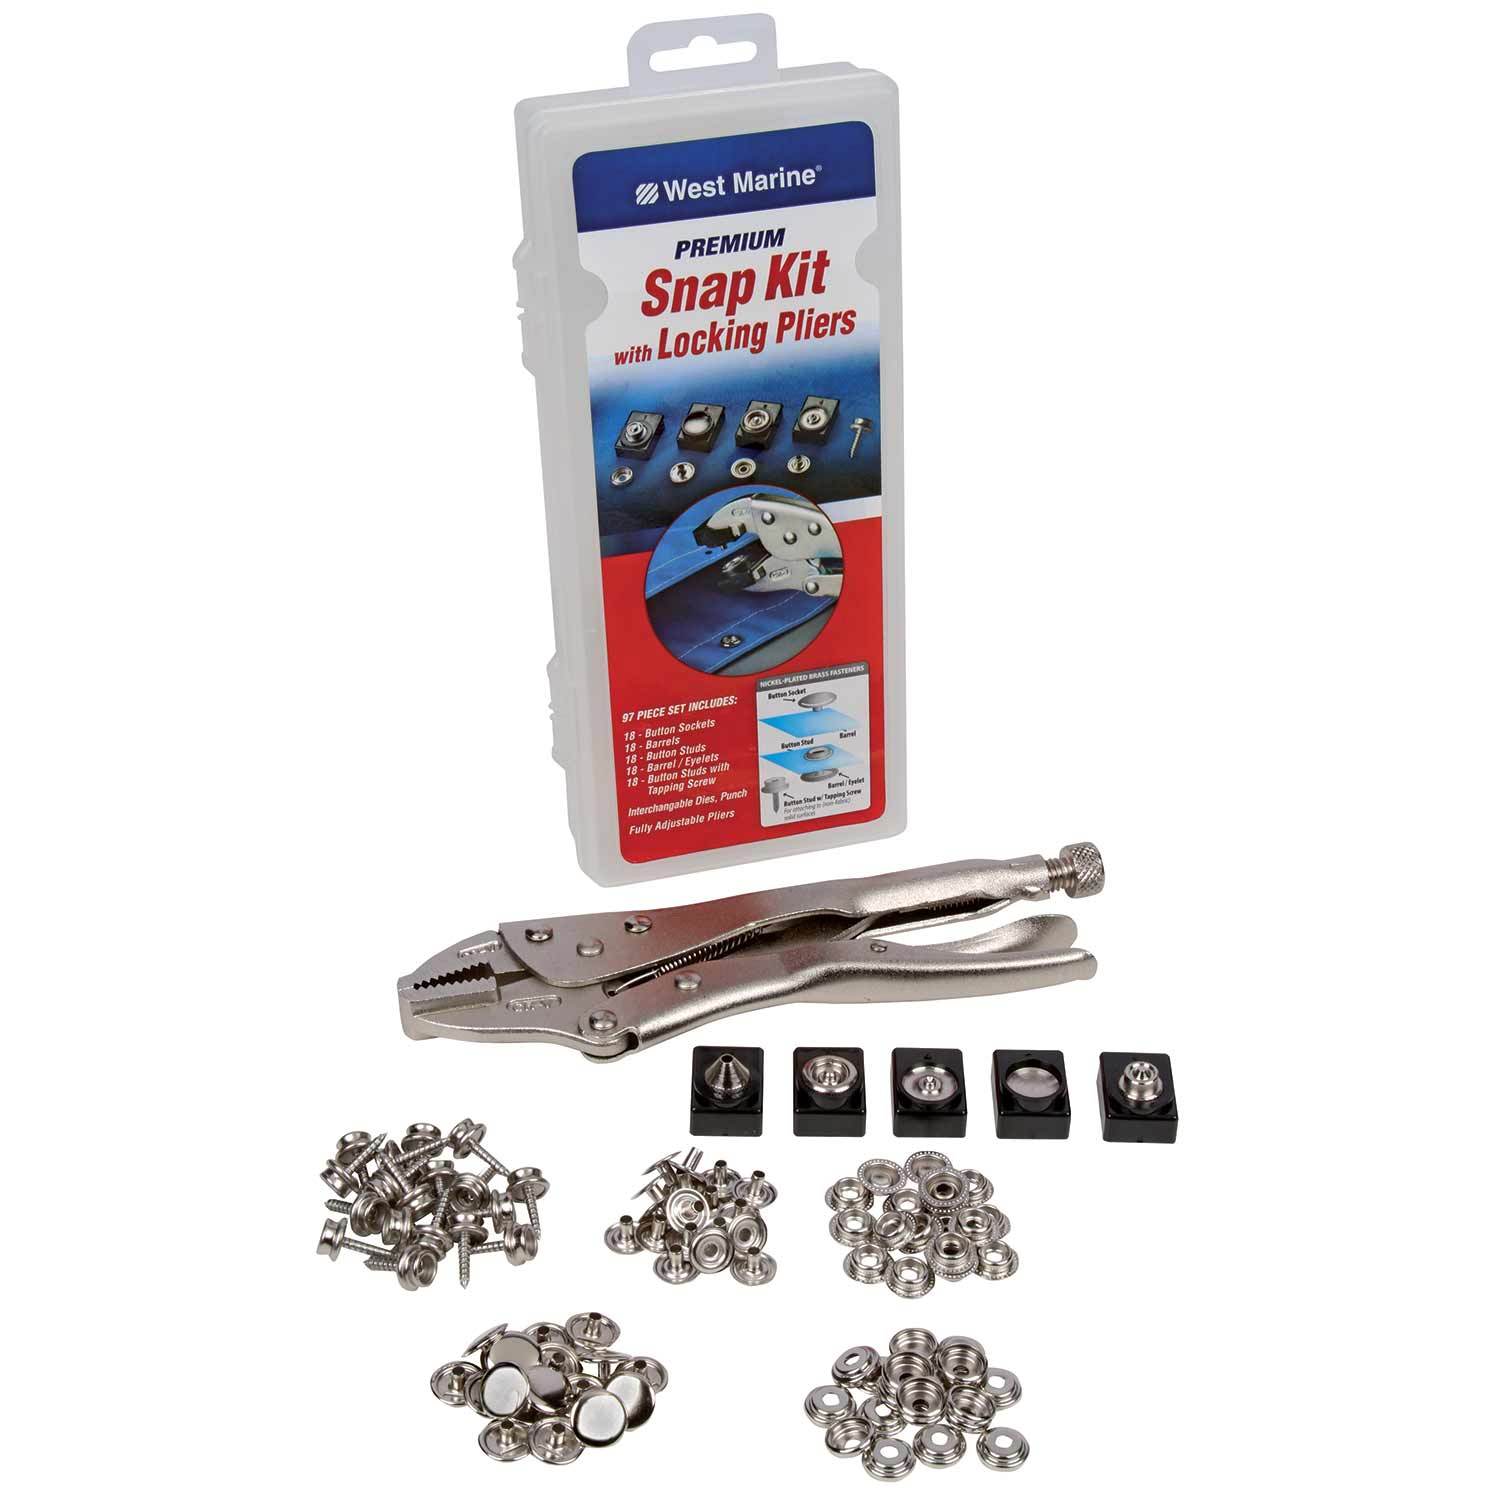 Snap Set with Long Posts for Thick Fabric or Carpet, All Stainless Steel  Parts Except The Eyelet,10 Pc. Set